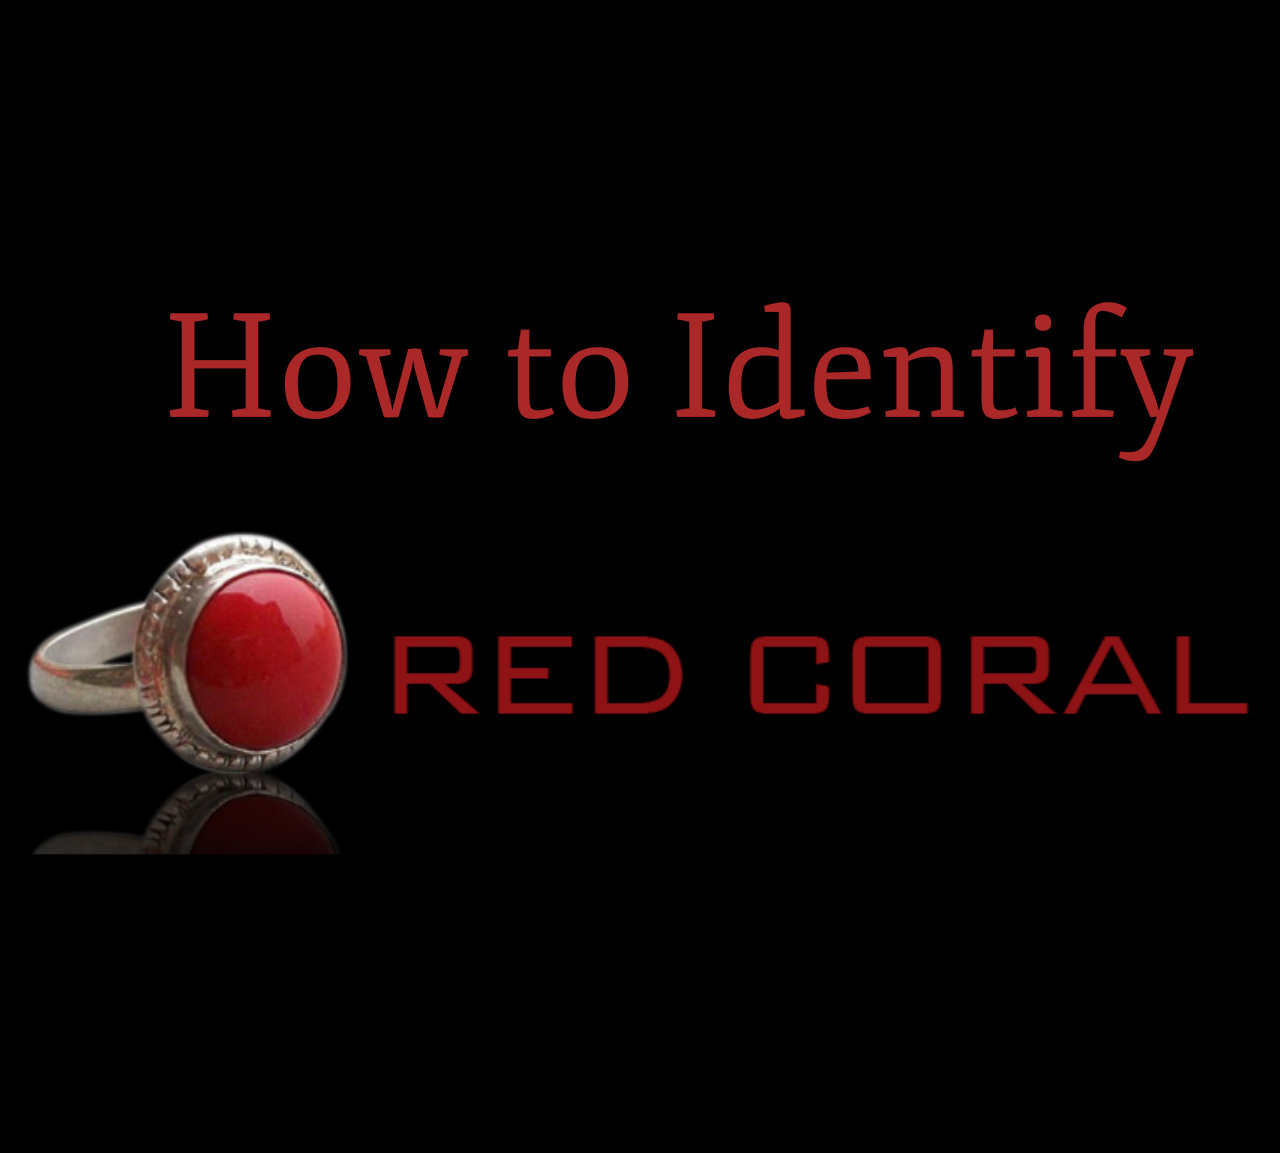 Red Coral Gemstone: 5 EASY TEST TO IDENTIFY REAL CORAL GEMSTONE